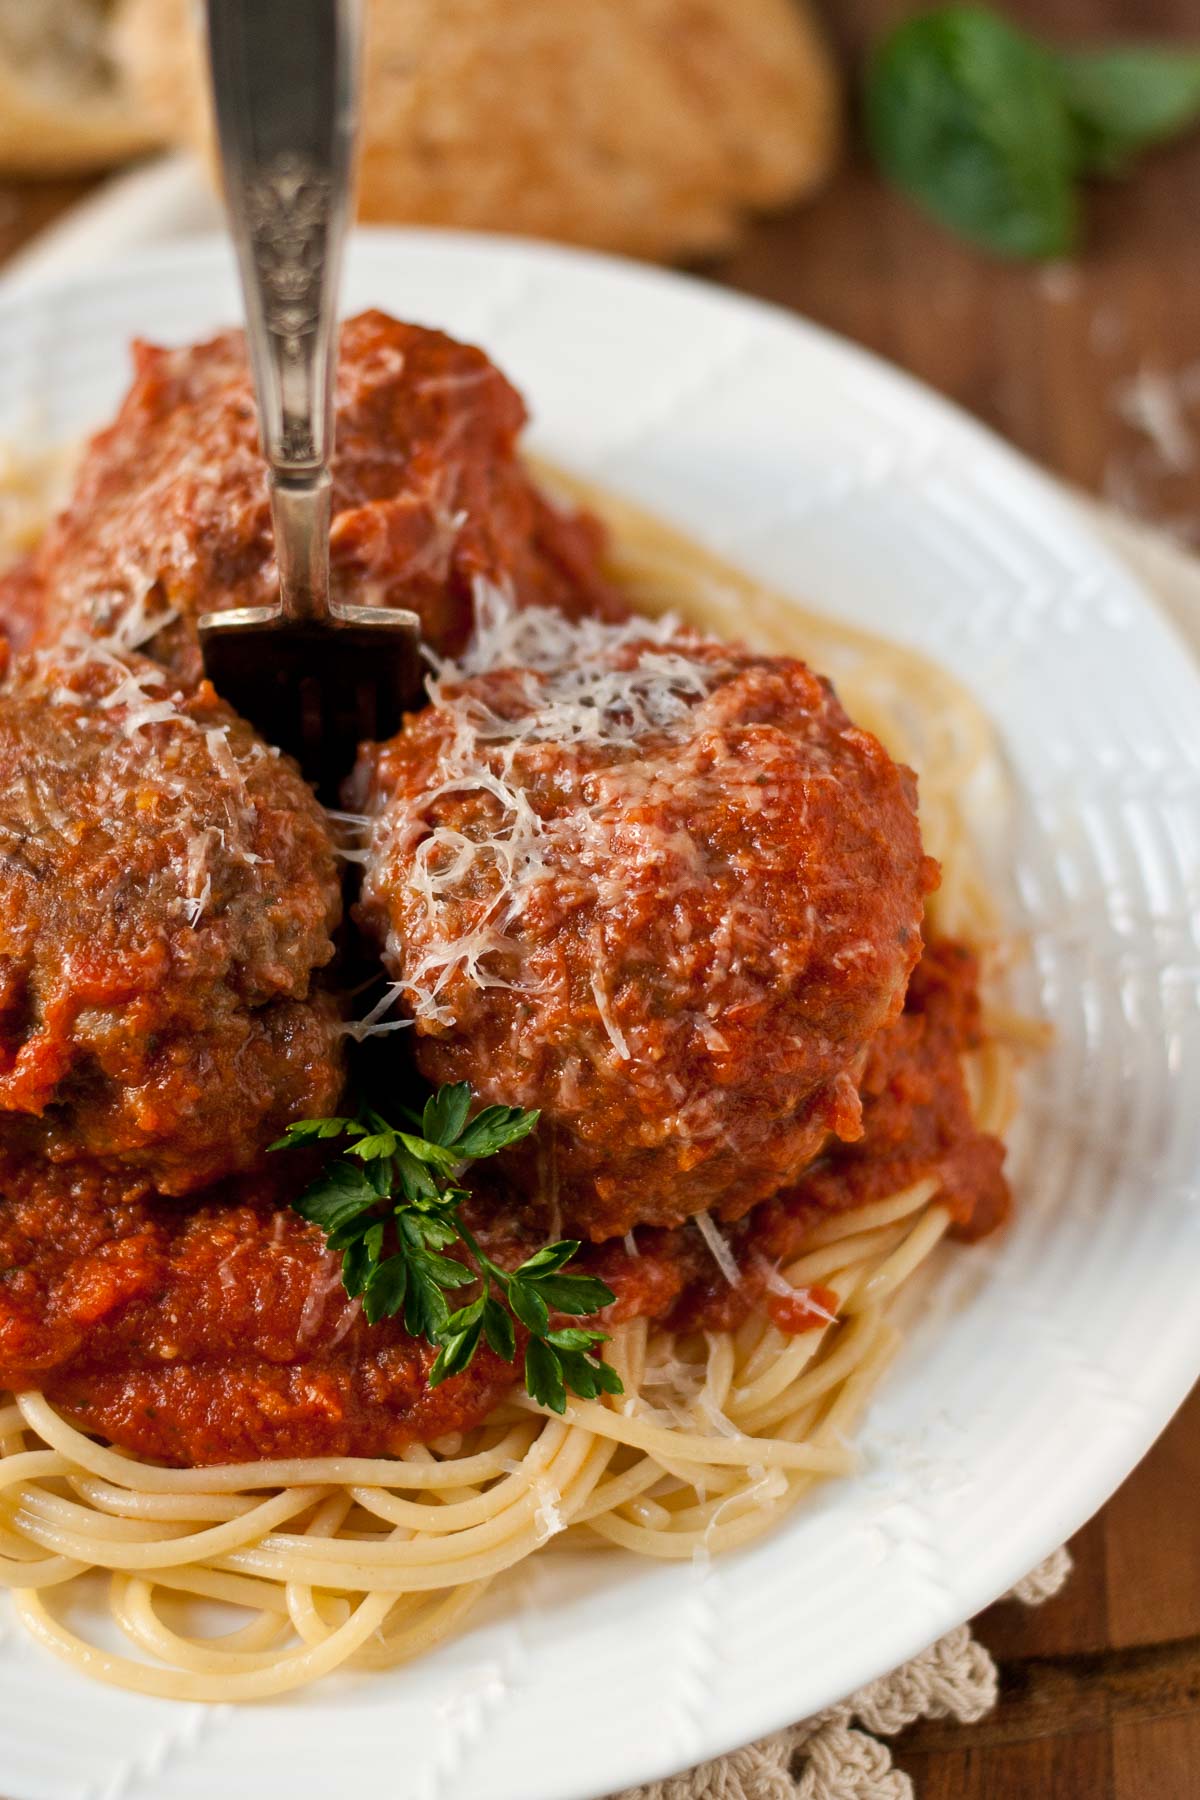 Tomato sauce and homemade meatballs on a bed of spaghetti.